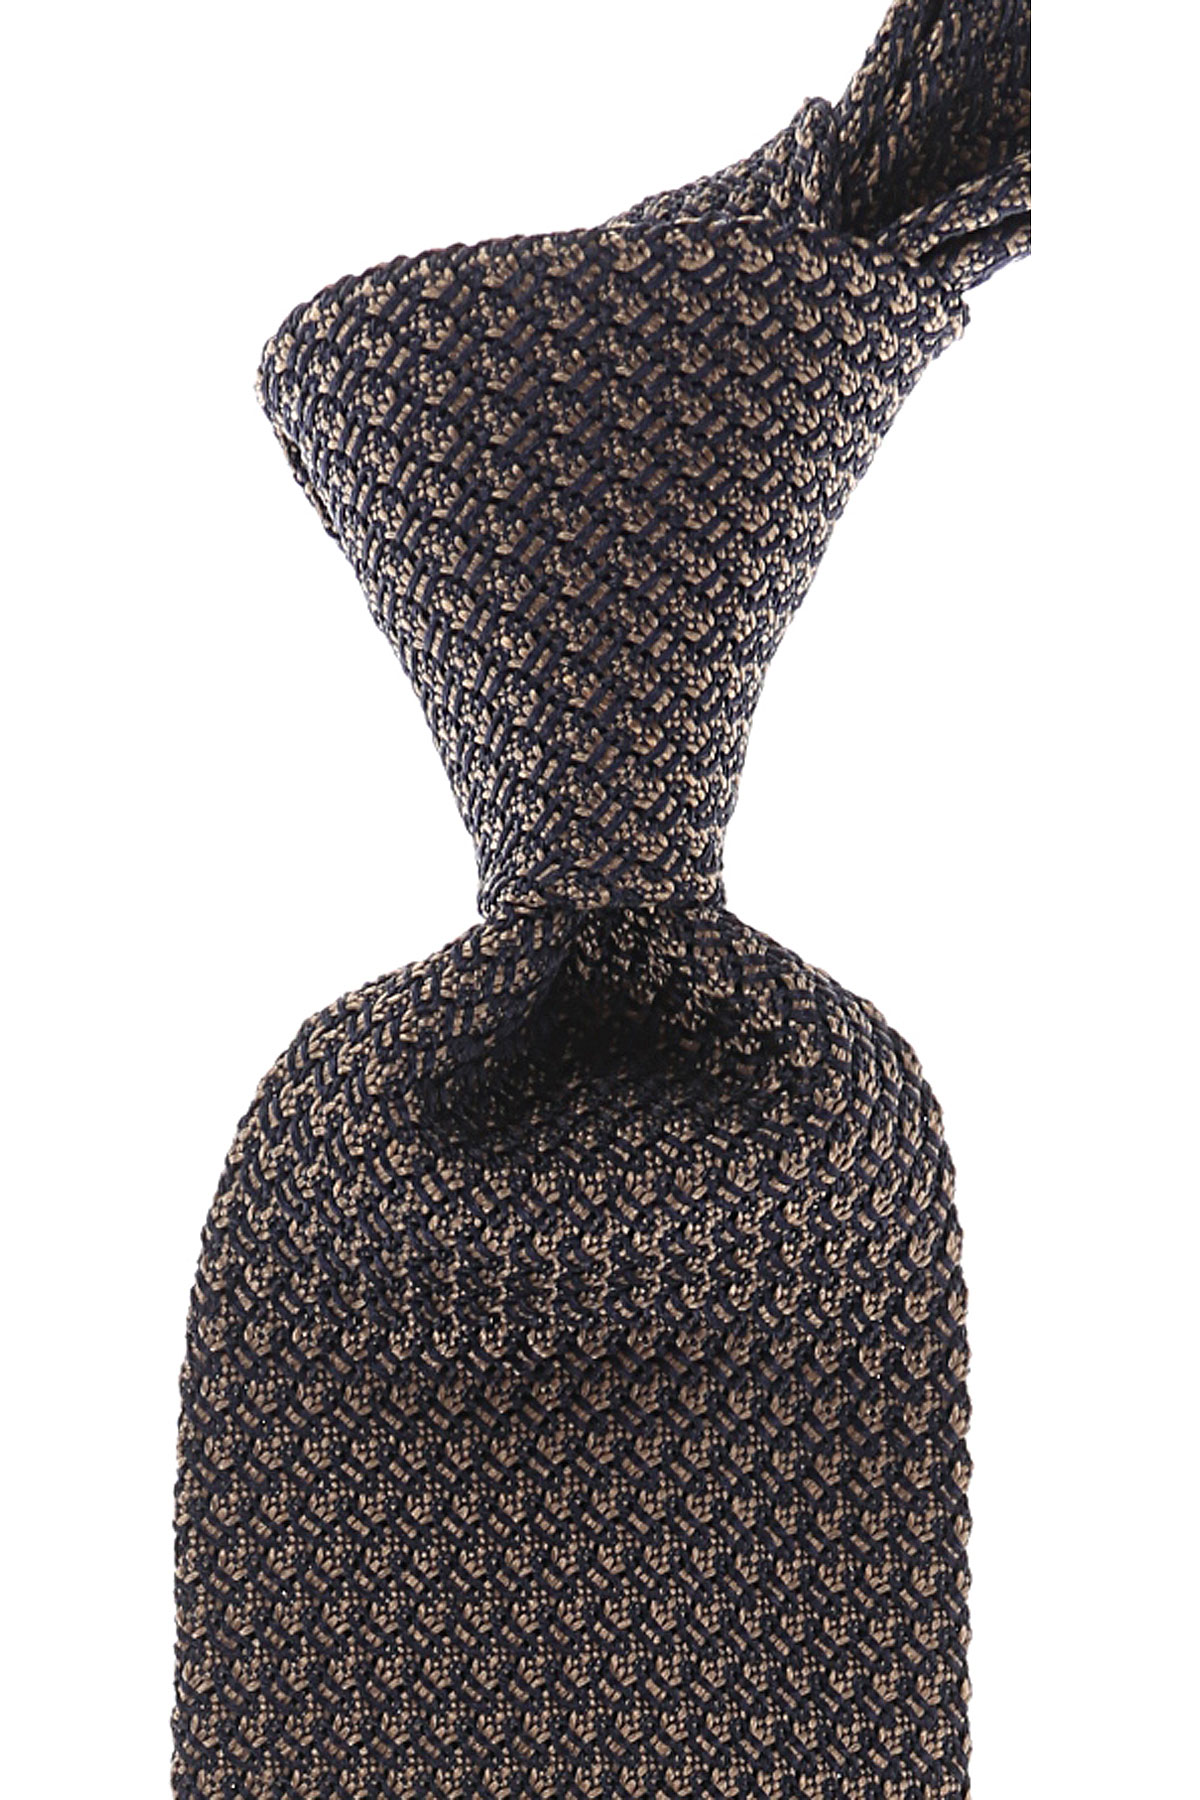 Ties Tom Ford, Style code: 217211--